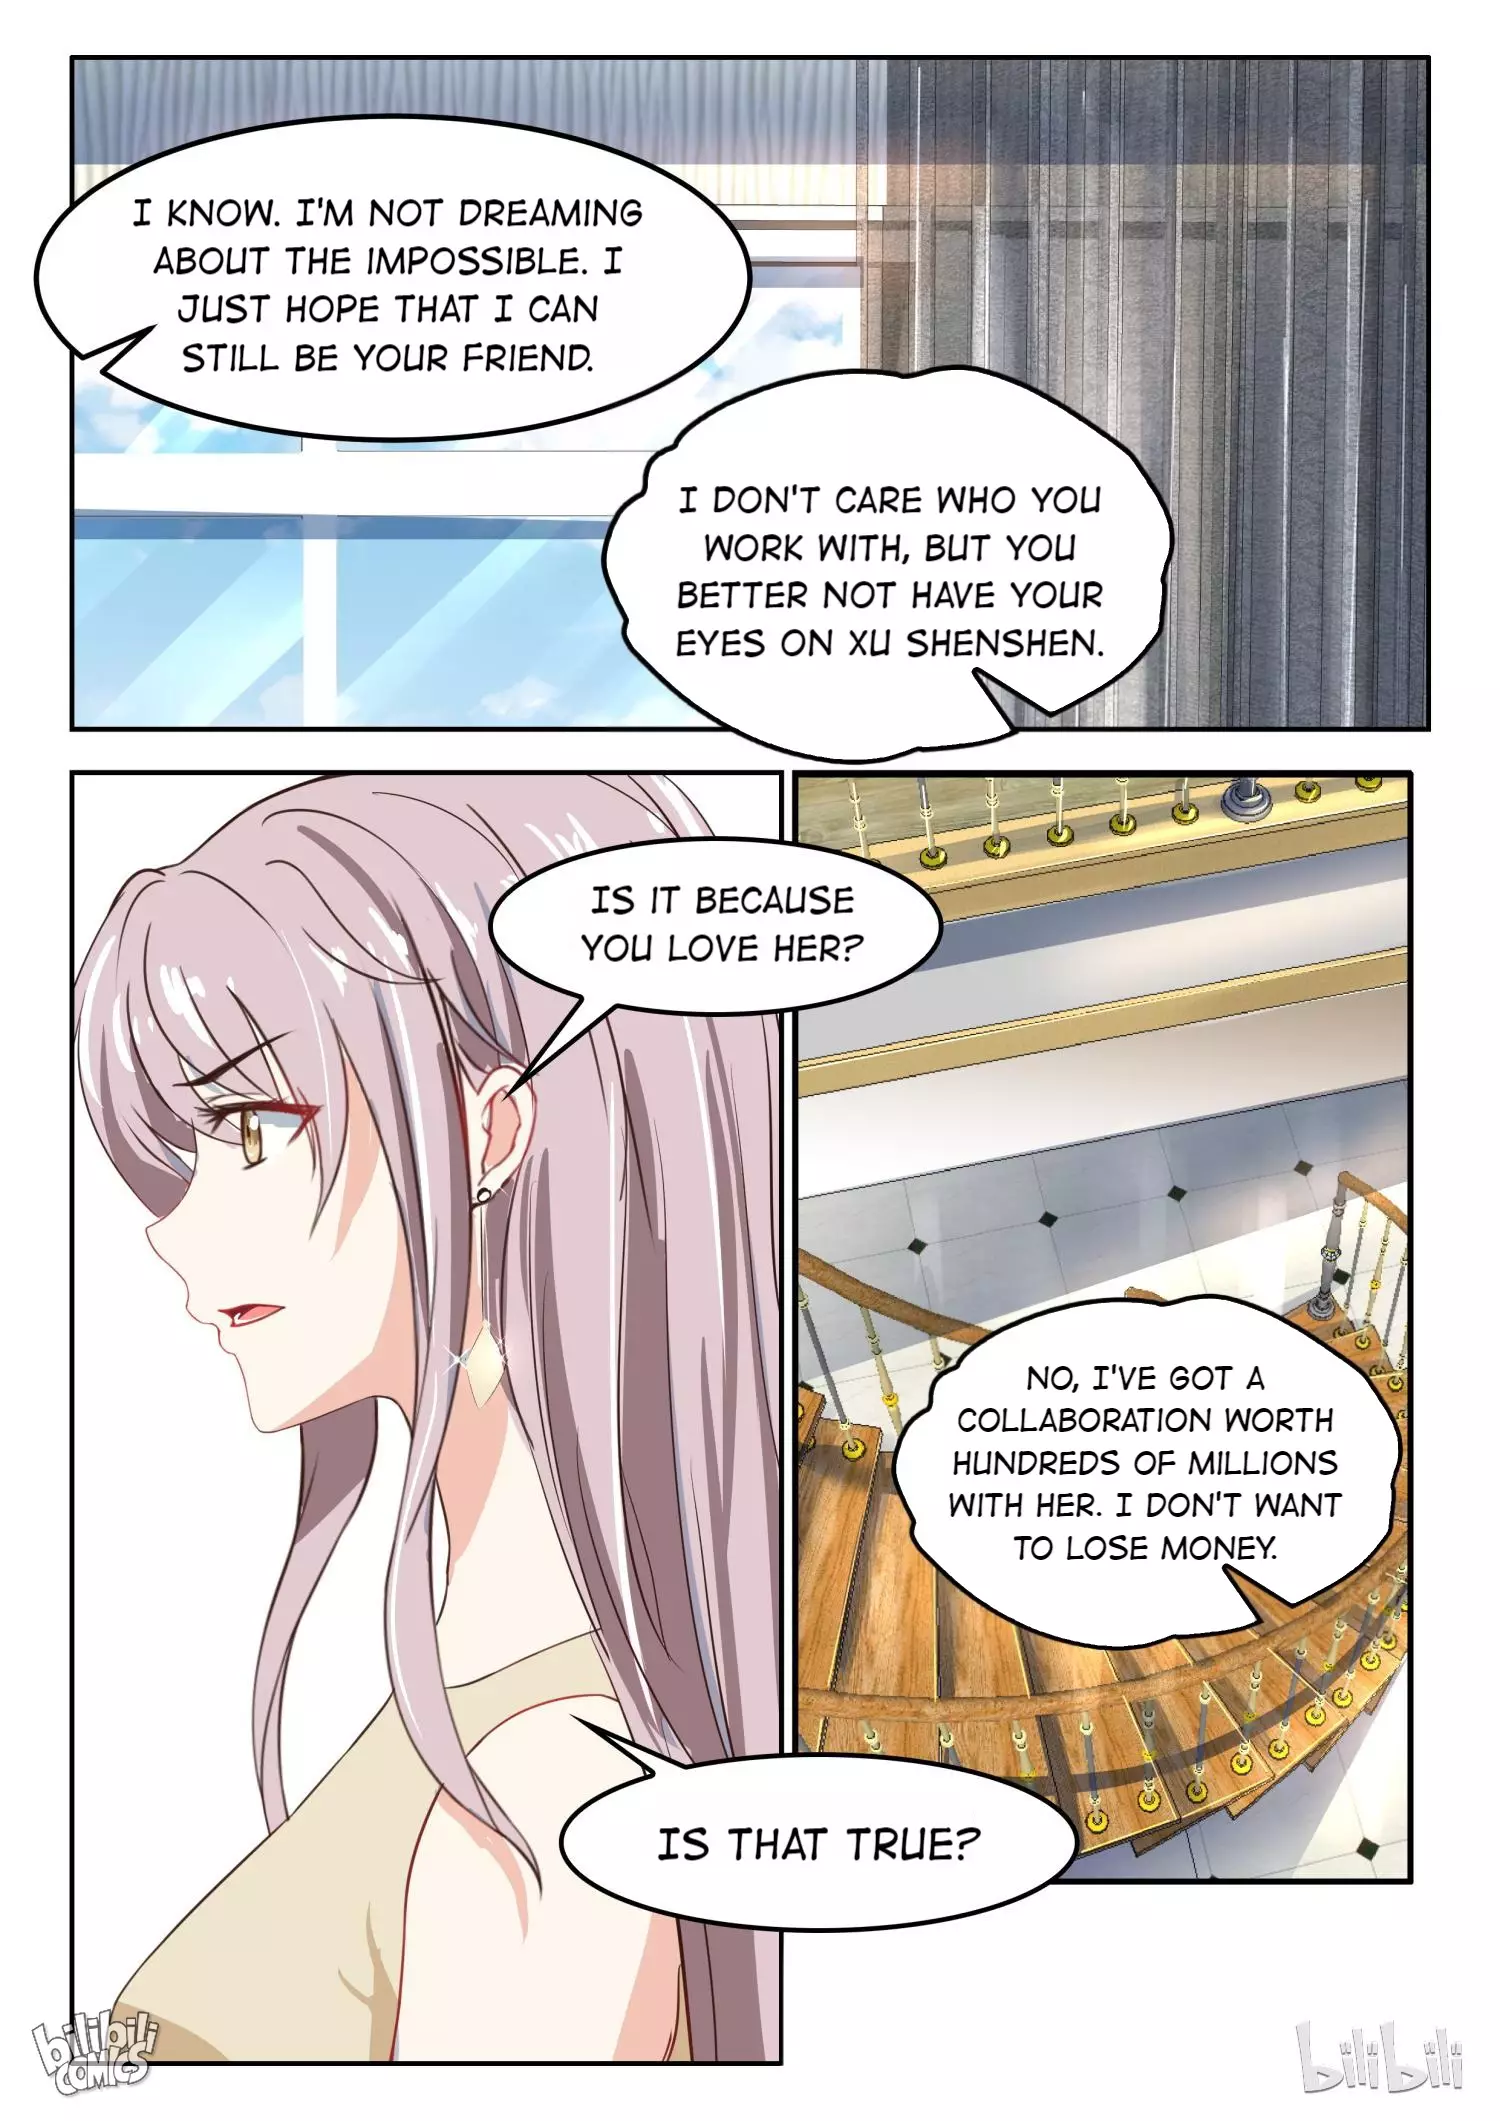 Scheming Marriage - 46 page 4-11fb28ff